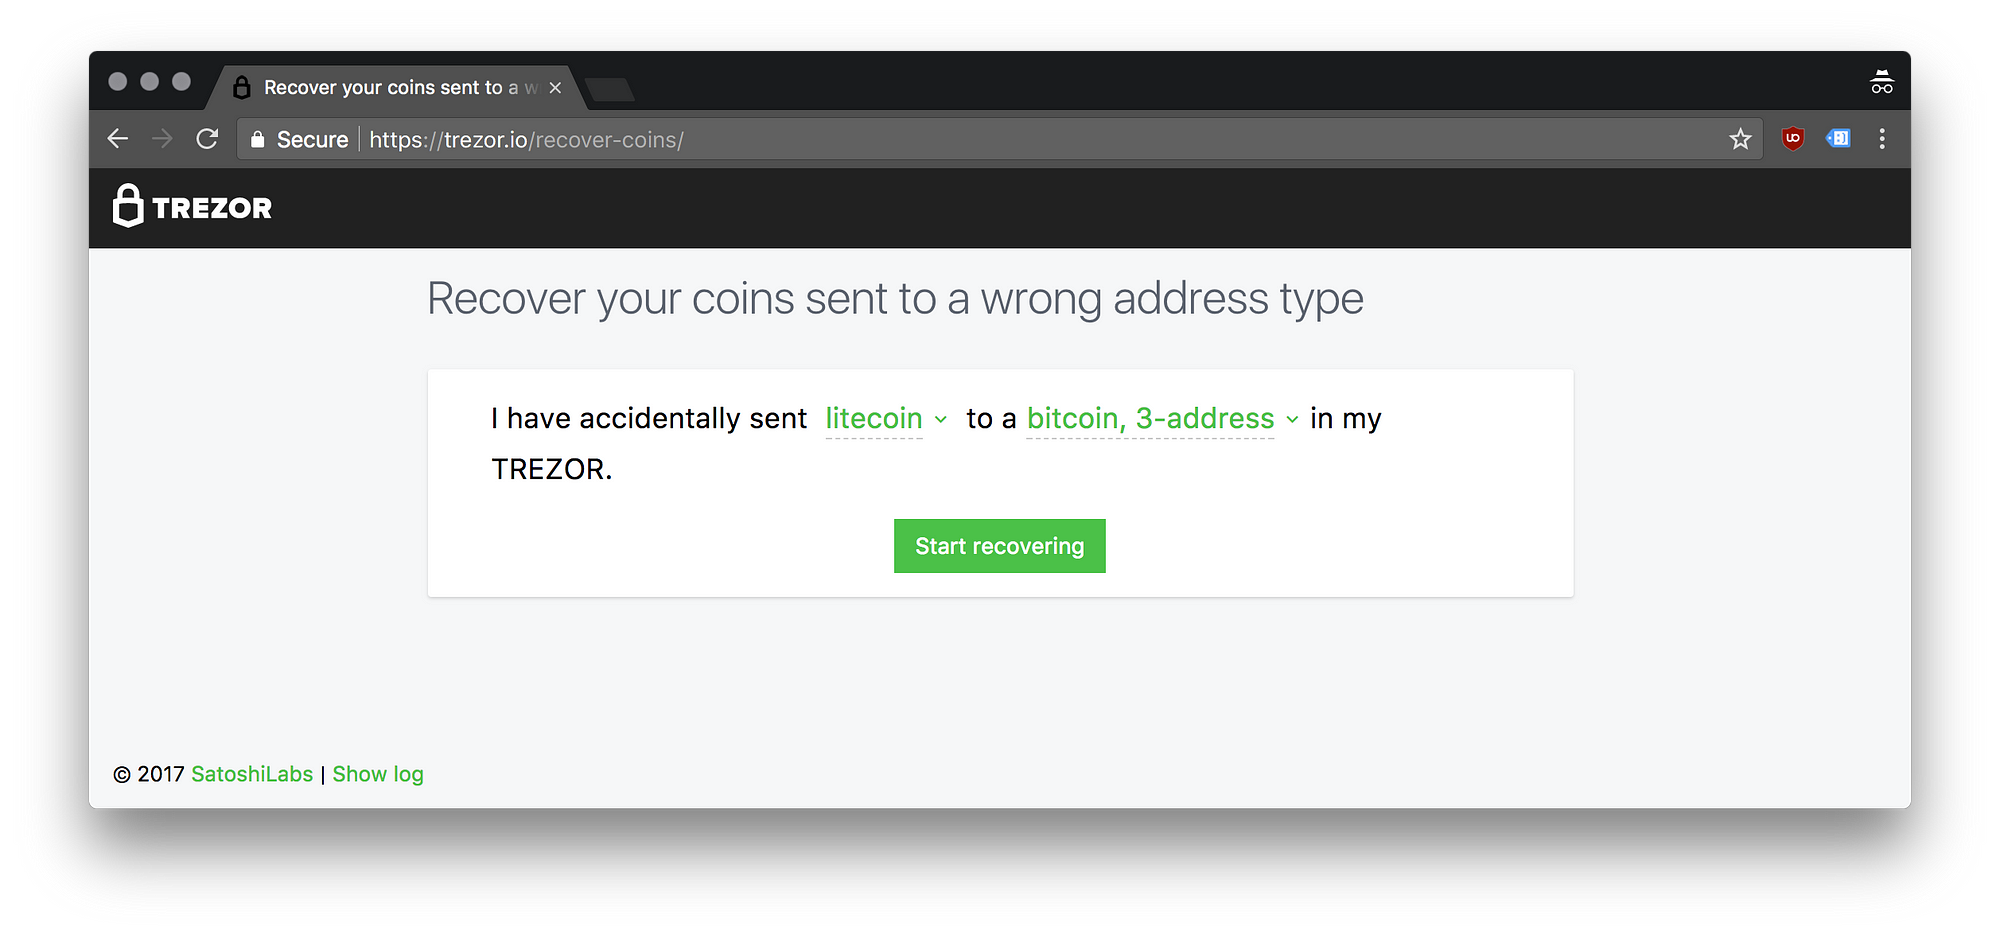 How To Contact Bitcoin Cash Address User Can You Send Litecoin To - 